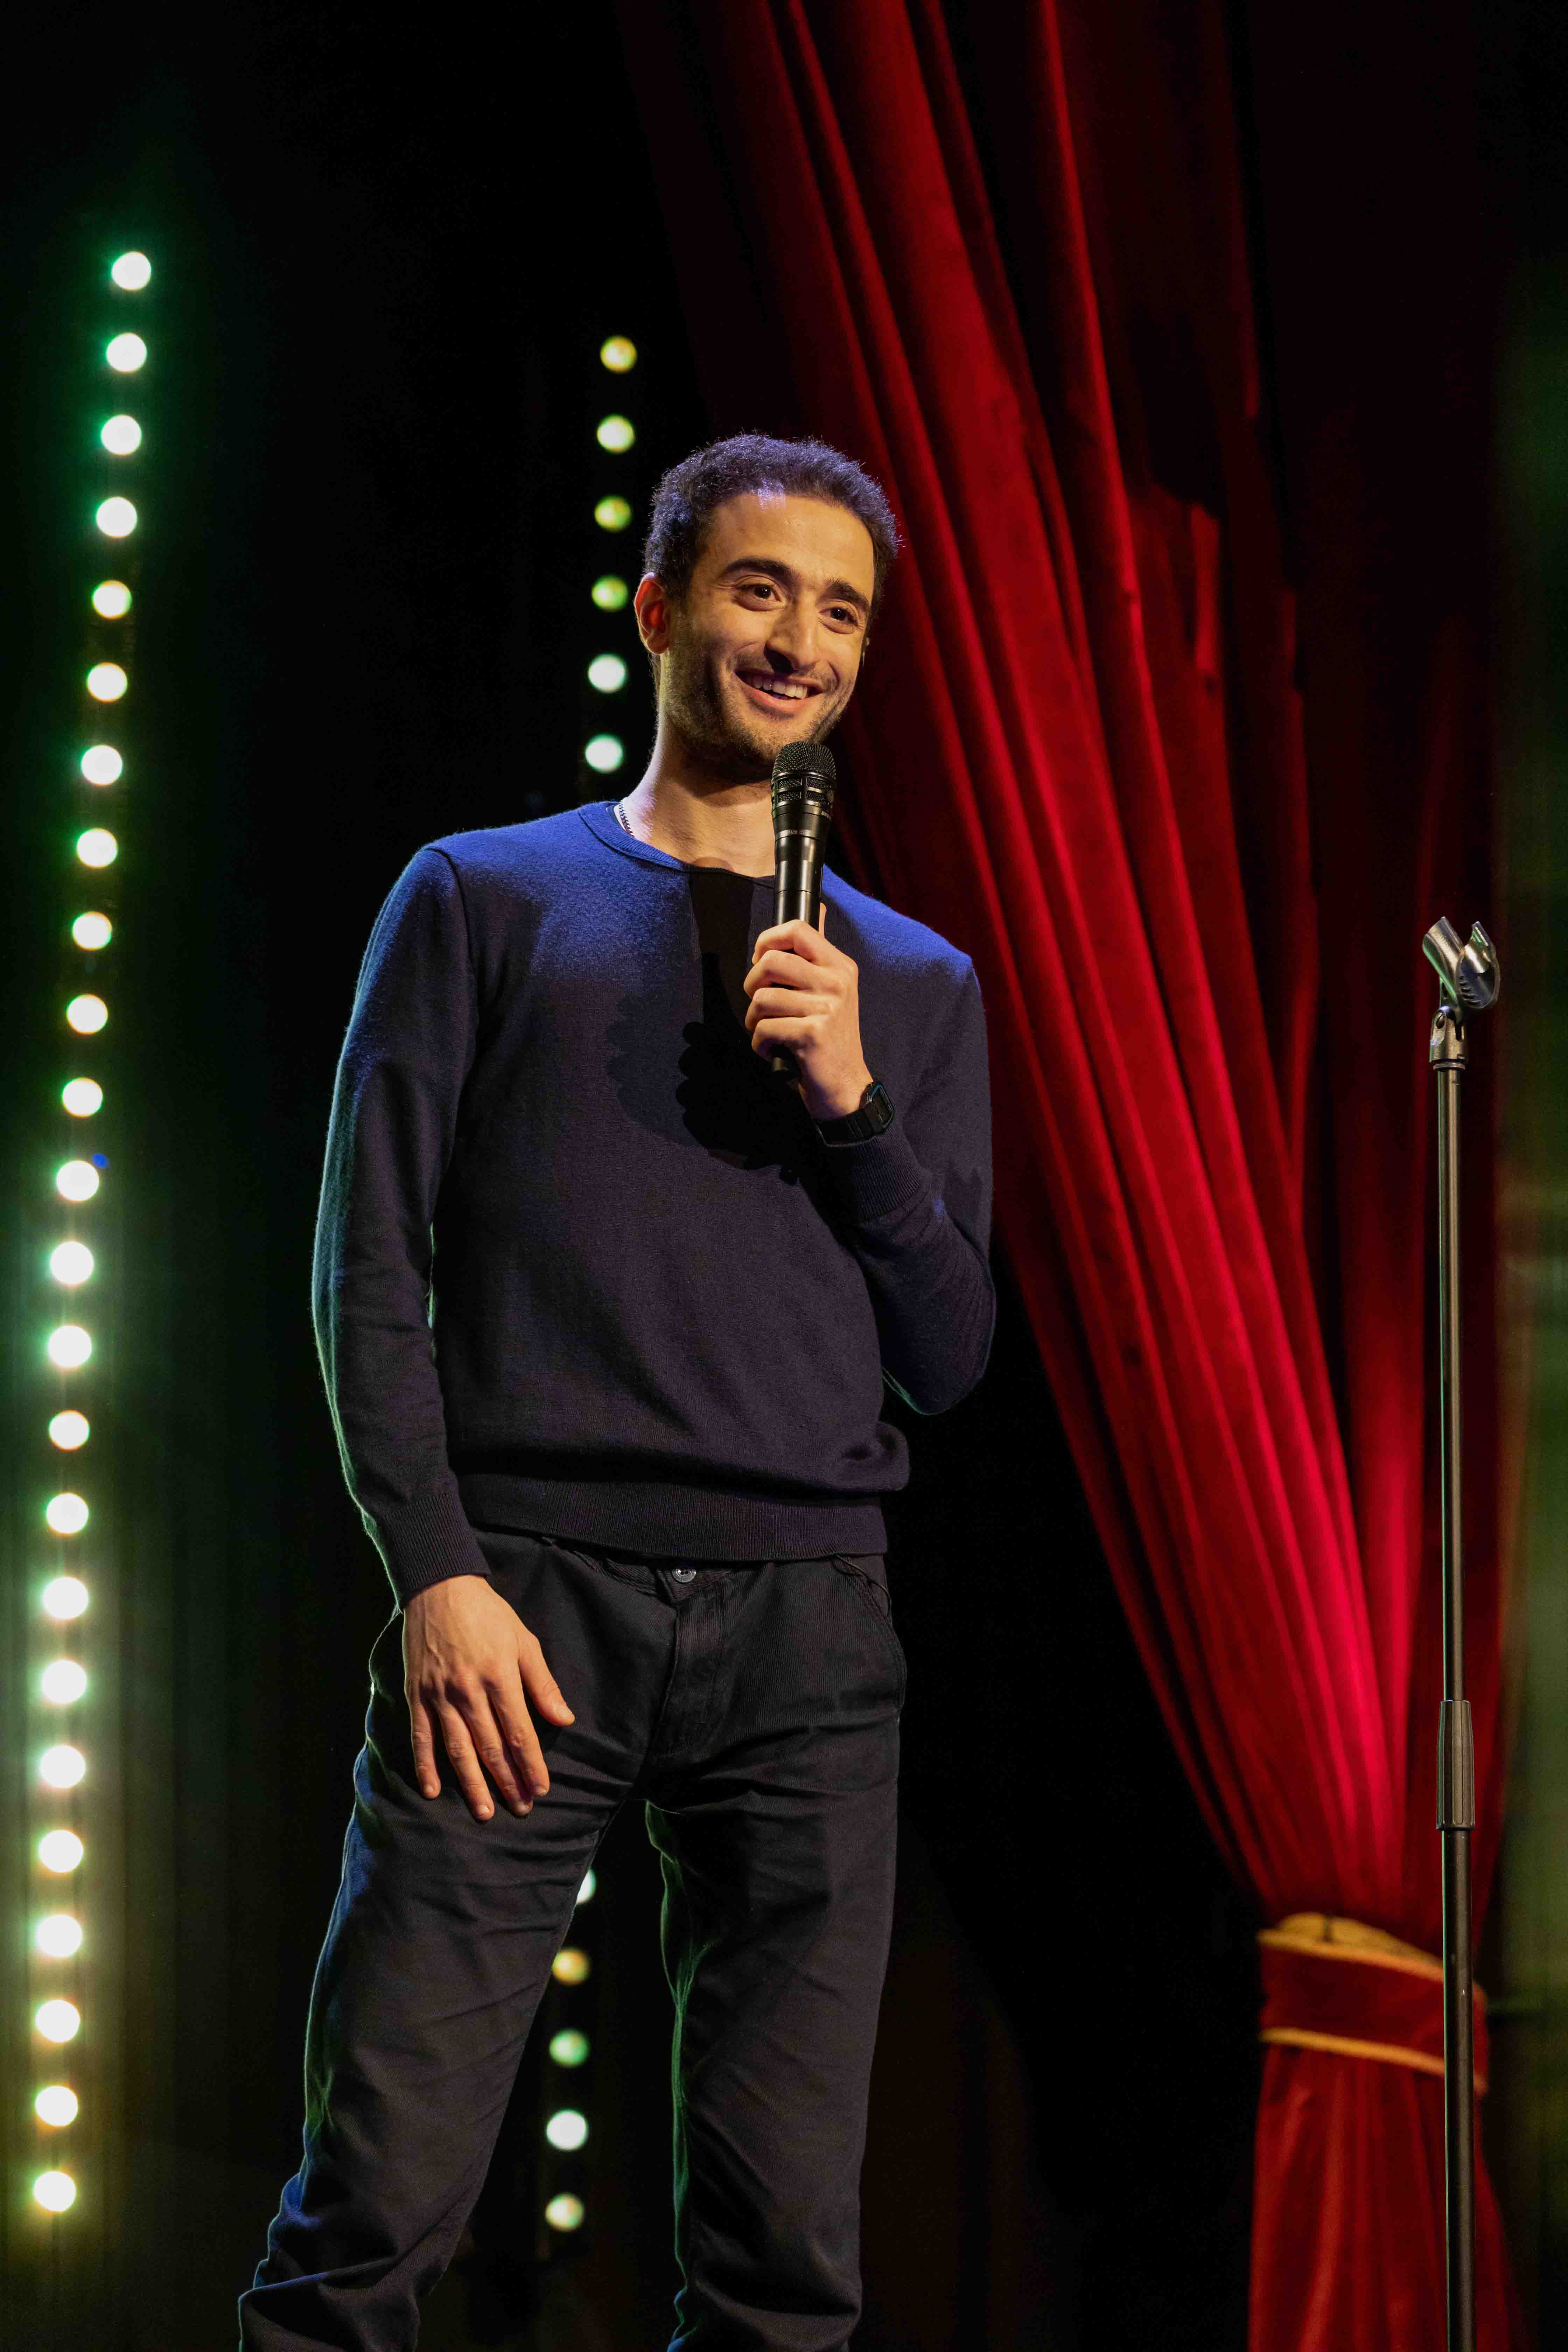 man with thick, dark, short hair wearing a dark sweater and dark jeans standing on stage, smiling while holding a microphone in front of a red curtain